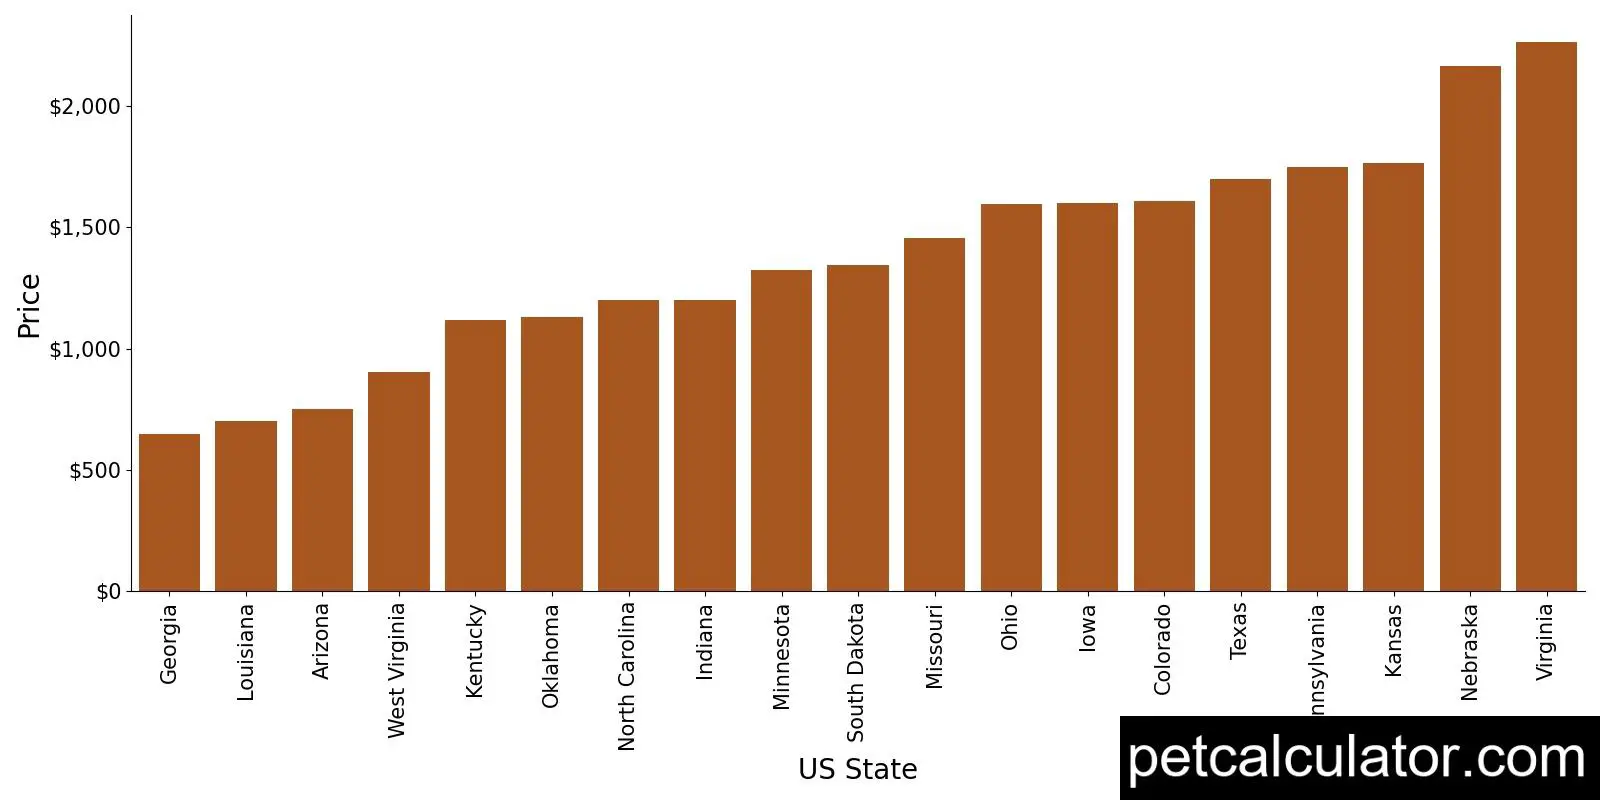 Price of Cairn Terrier by US State 